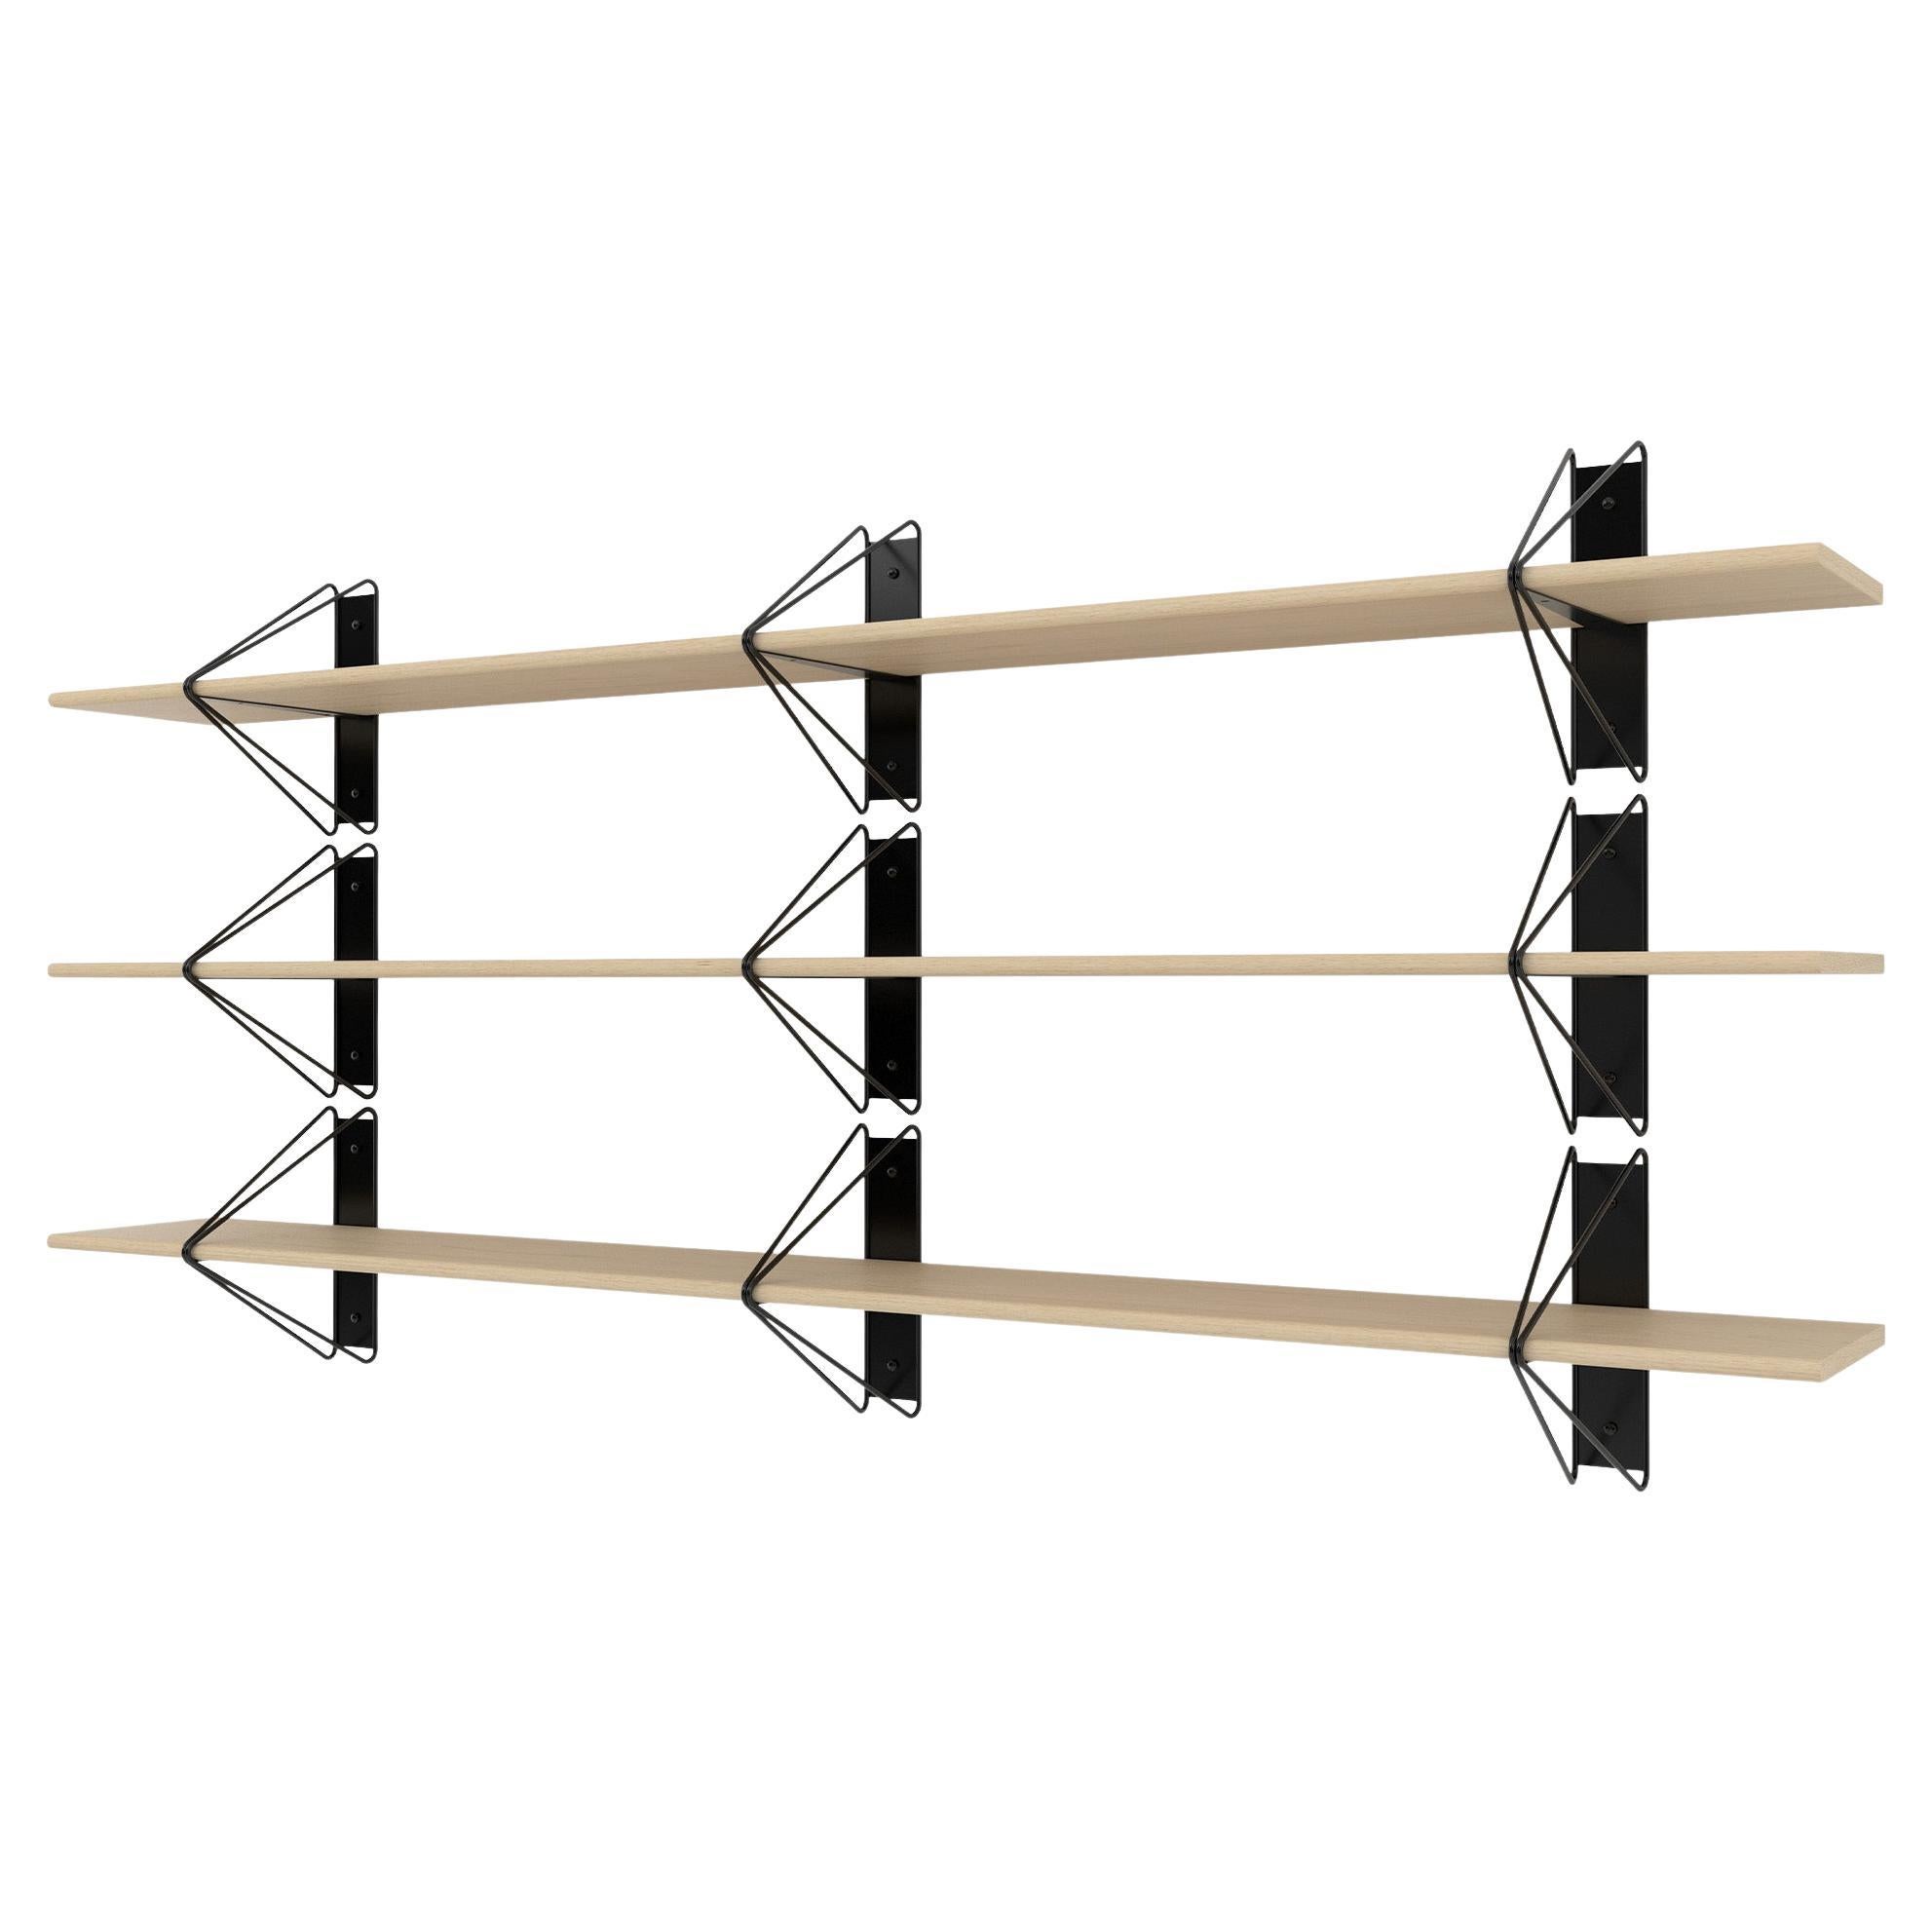 Set of 3 Strut Shelves from Souda, Black and Maple, Made to Order For Sale